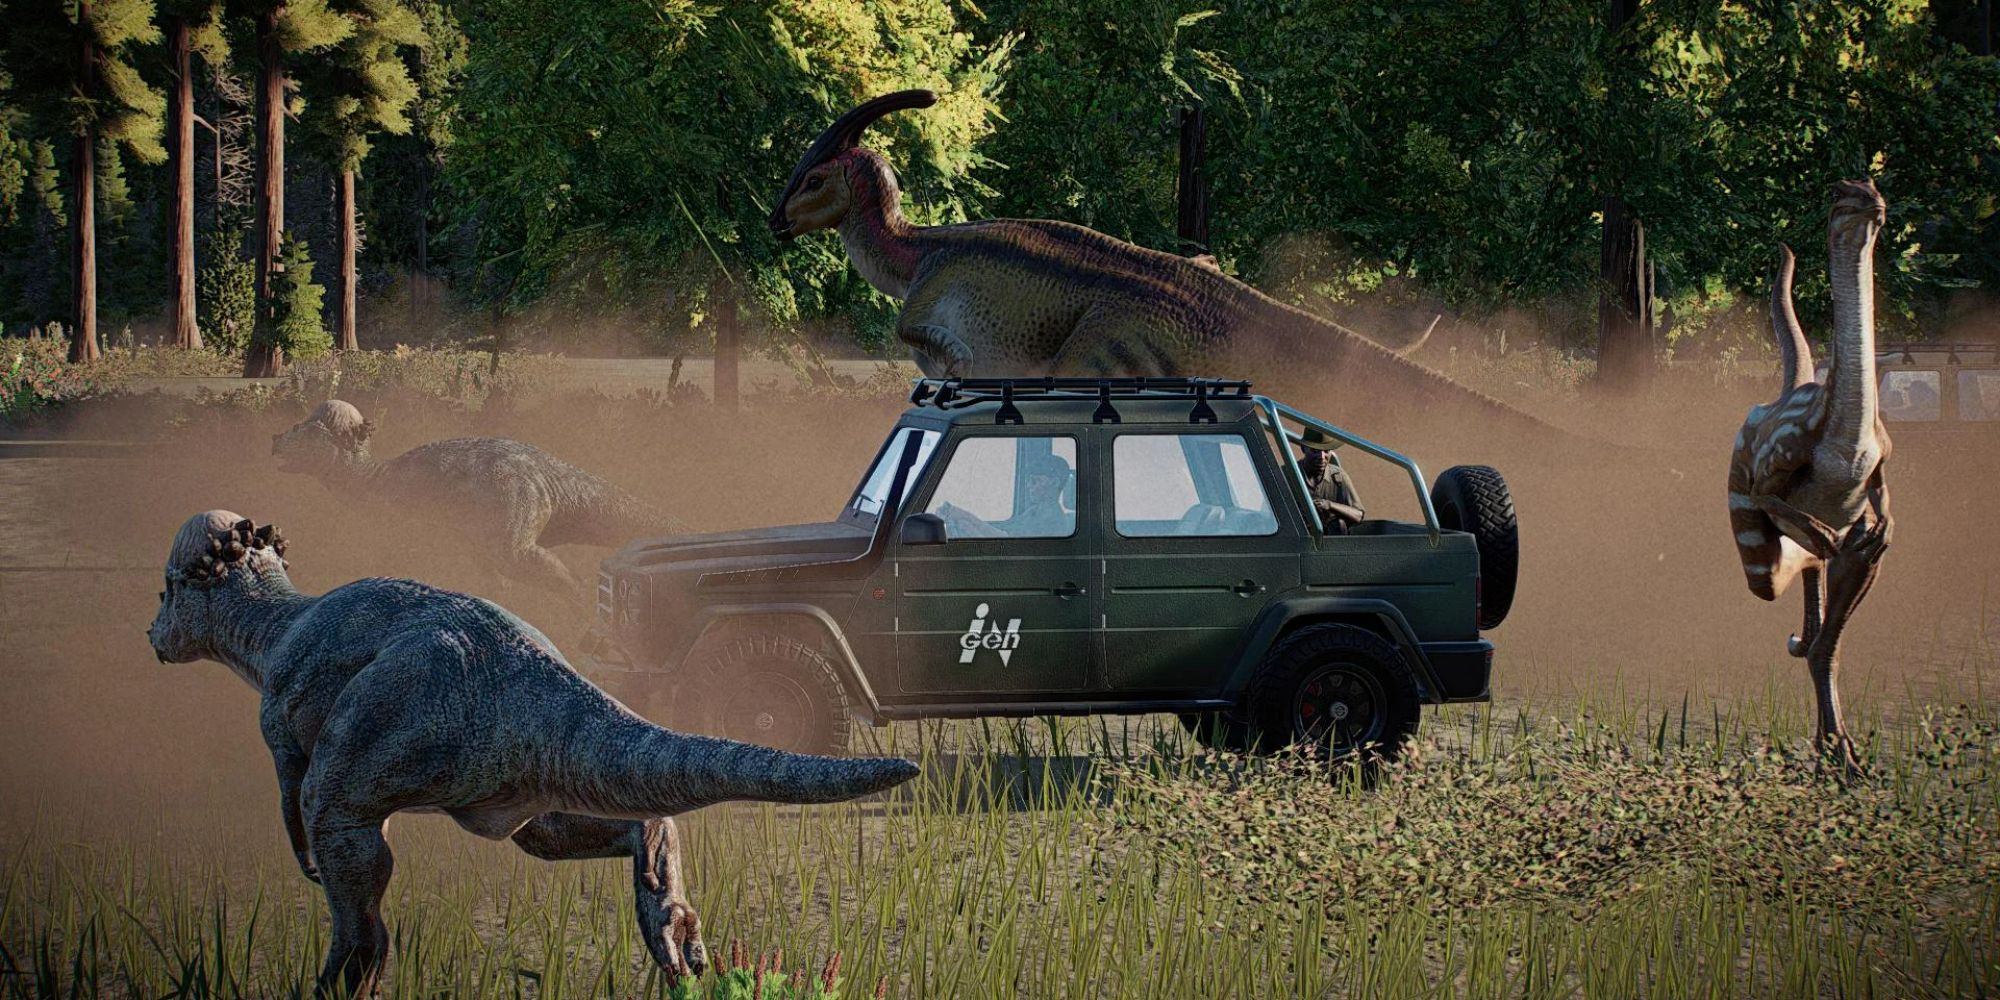 Recreation of a classic scene from JW3 during a Chaos Theory mission in Jurassic World Evolution 2